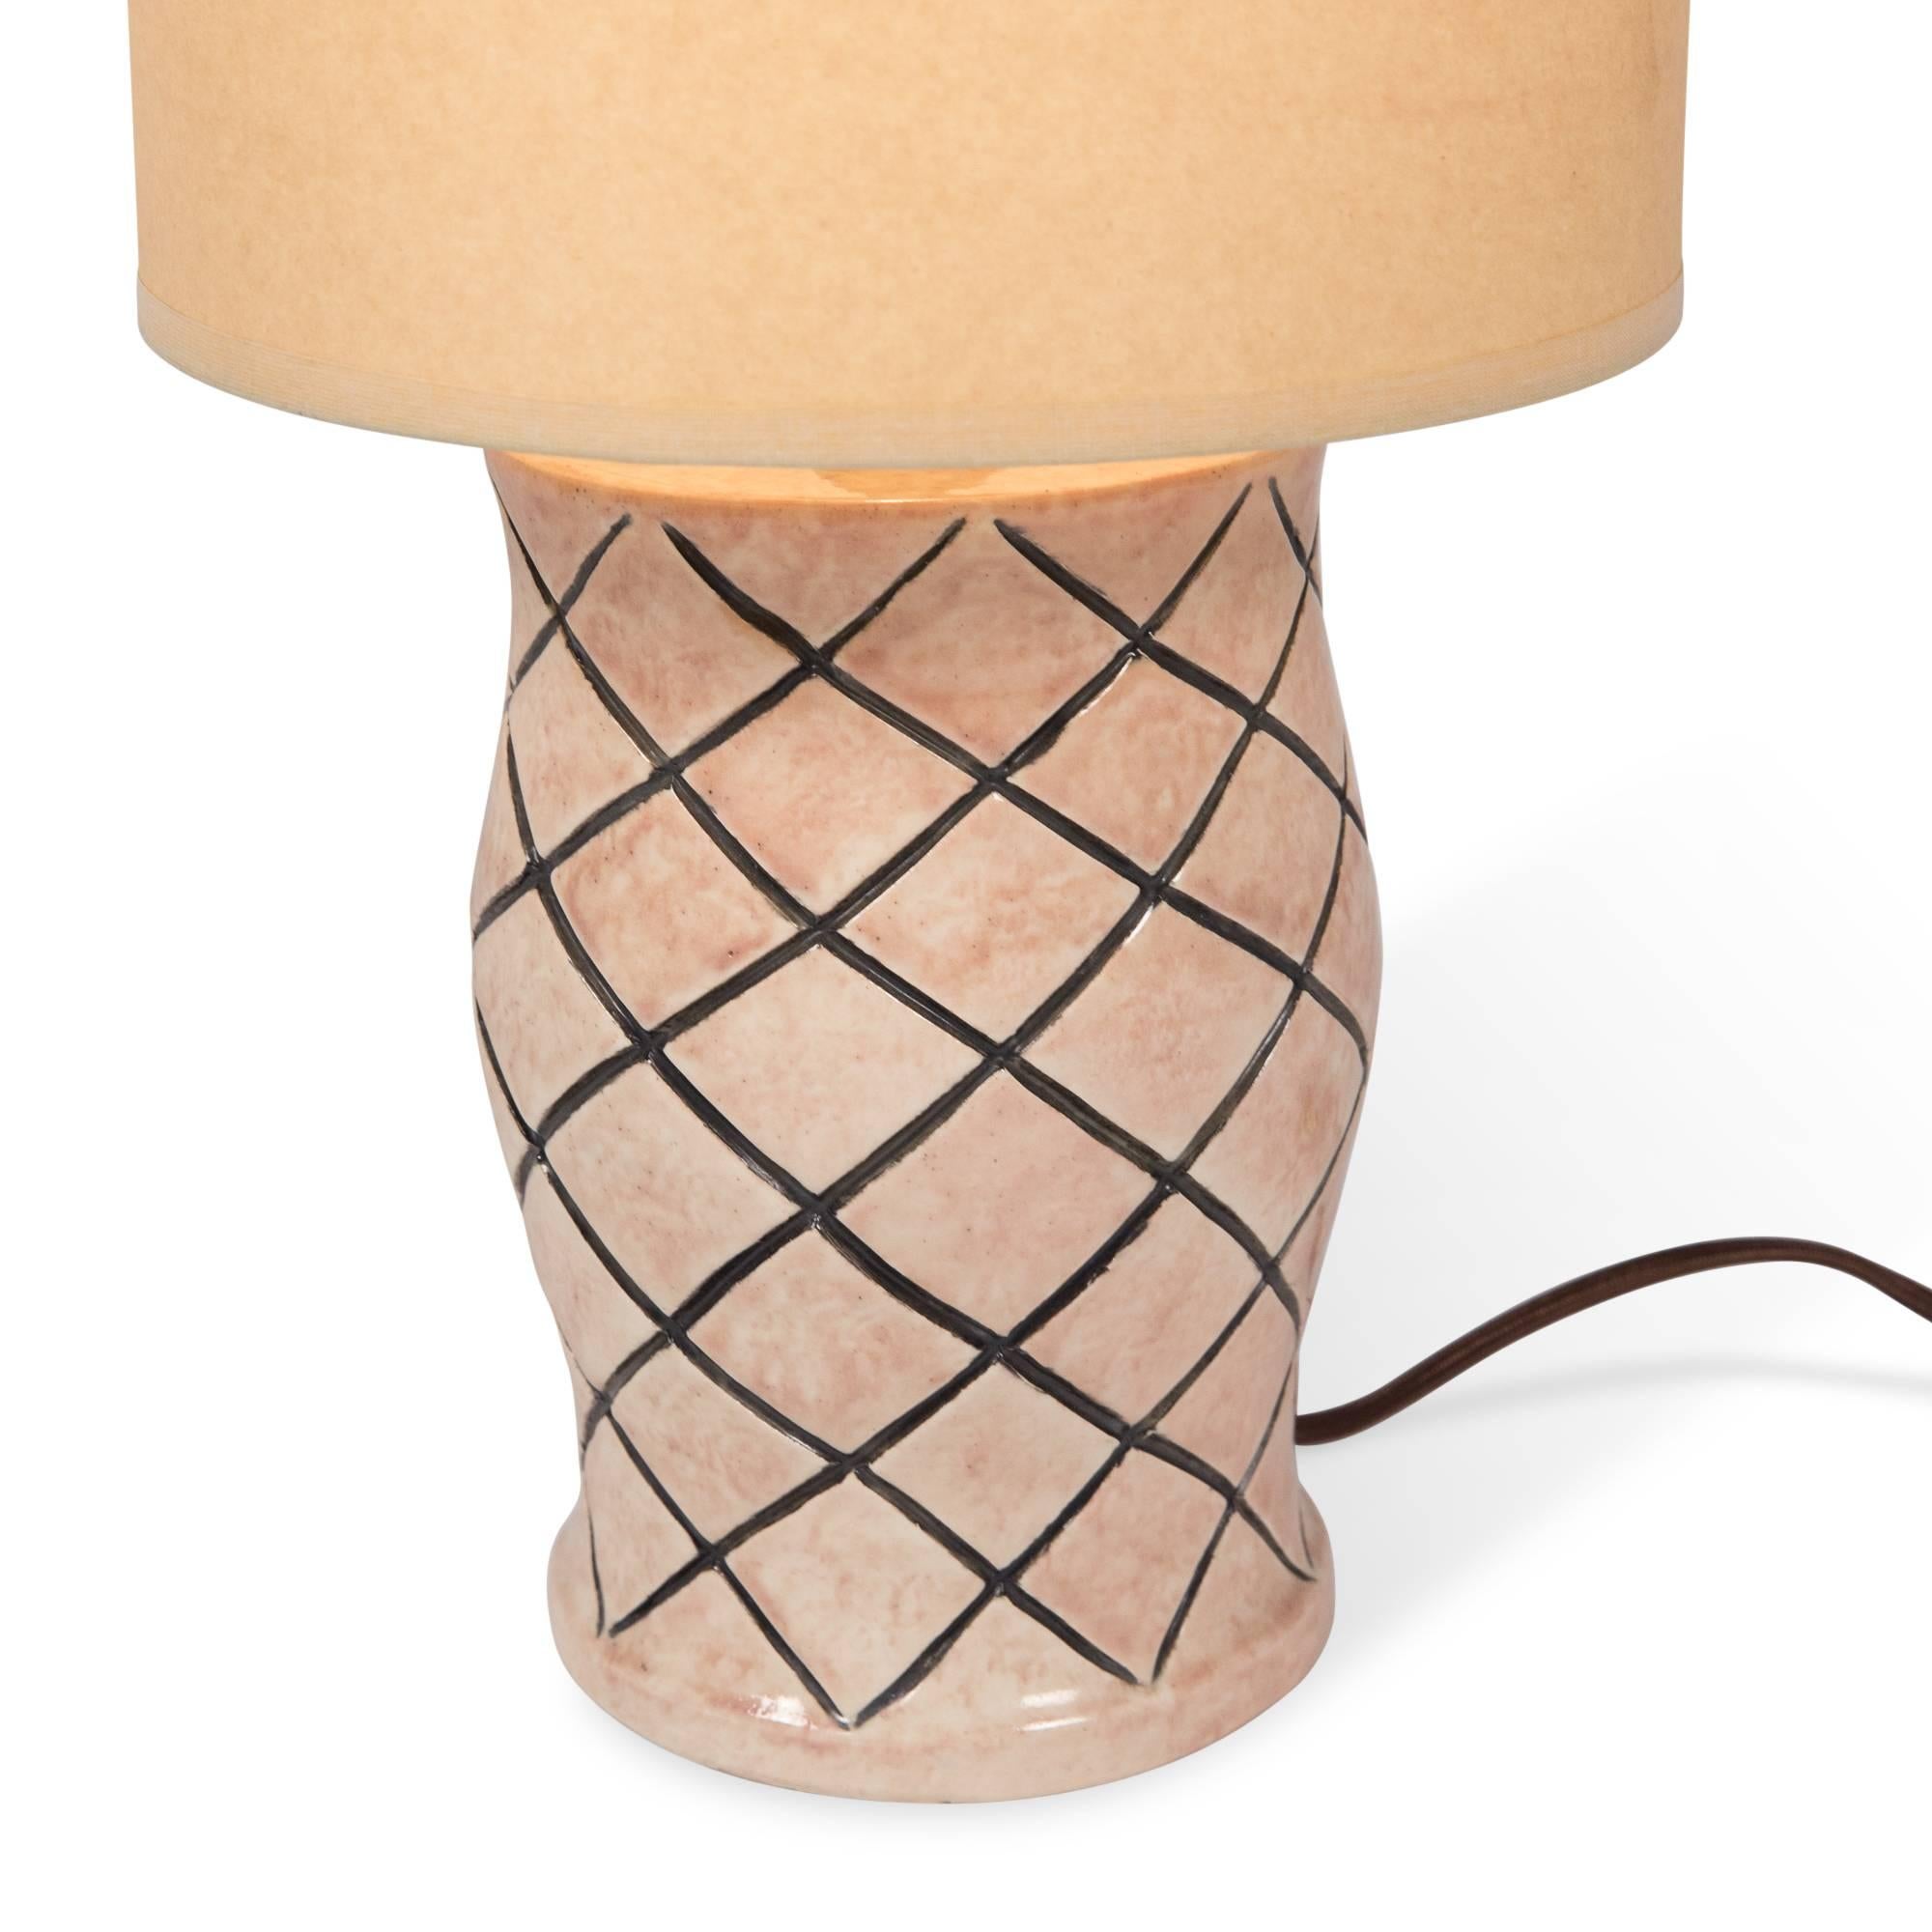 Art Deco Crosshatch Glazed Ceramic Table Lamp, French, 1930s For Sale